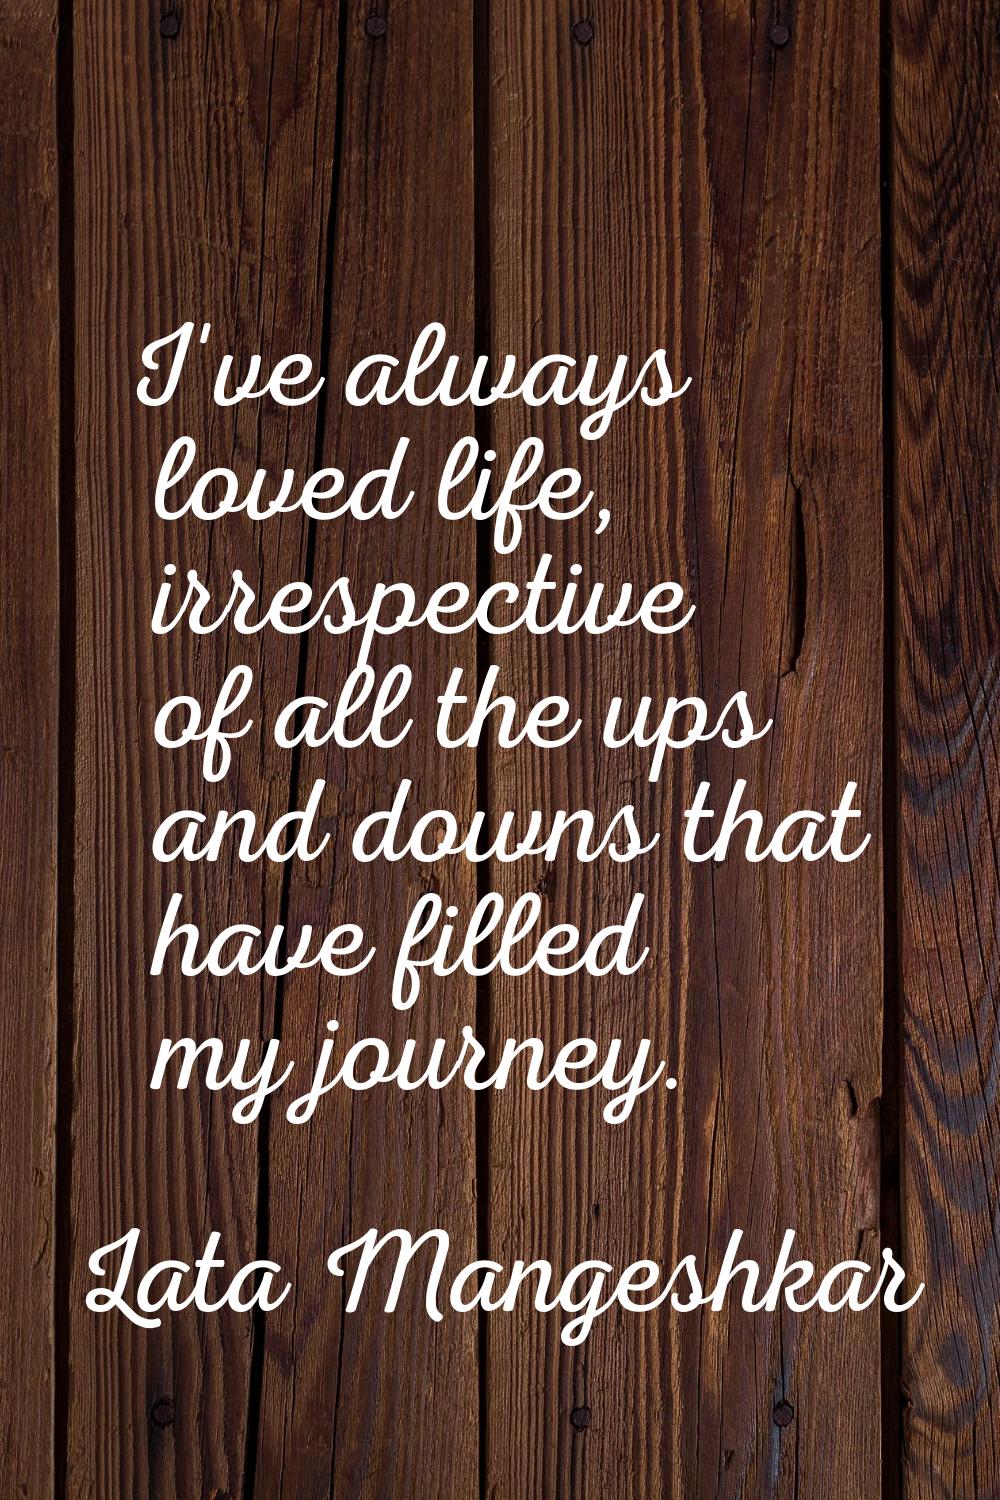 I've always loved life, irrespective of all the ups and downs that have filled my journey.